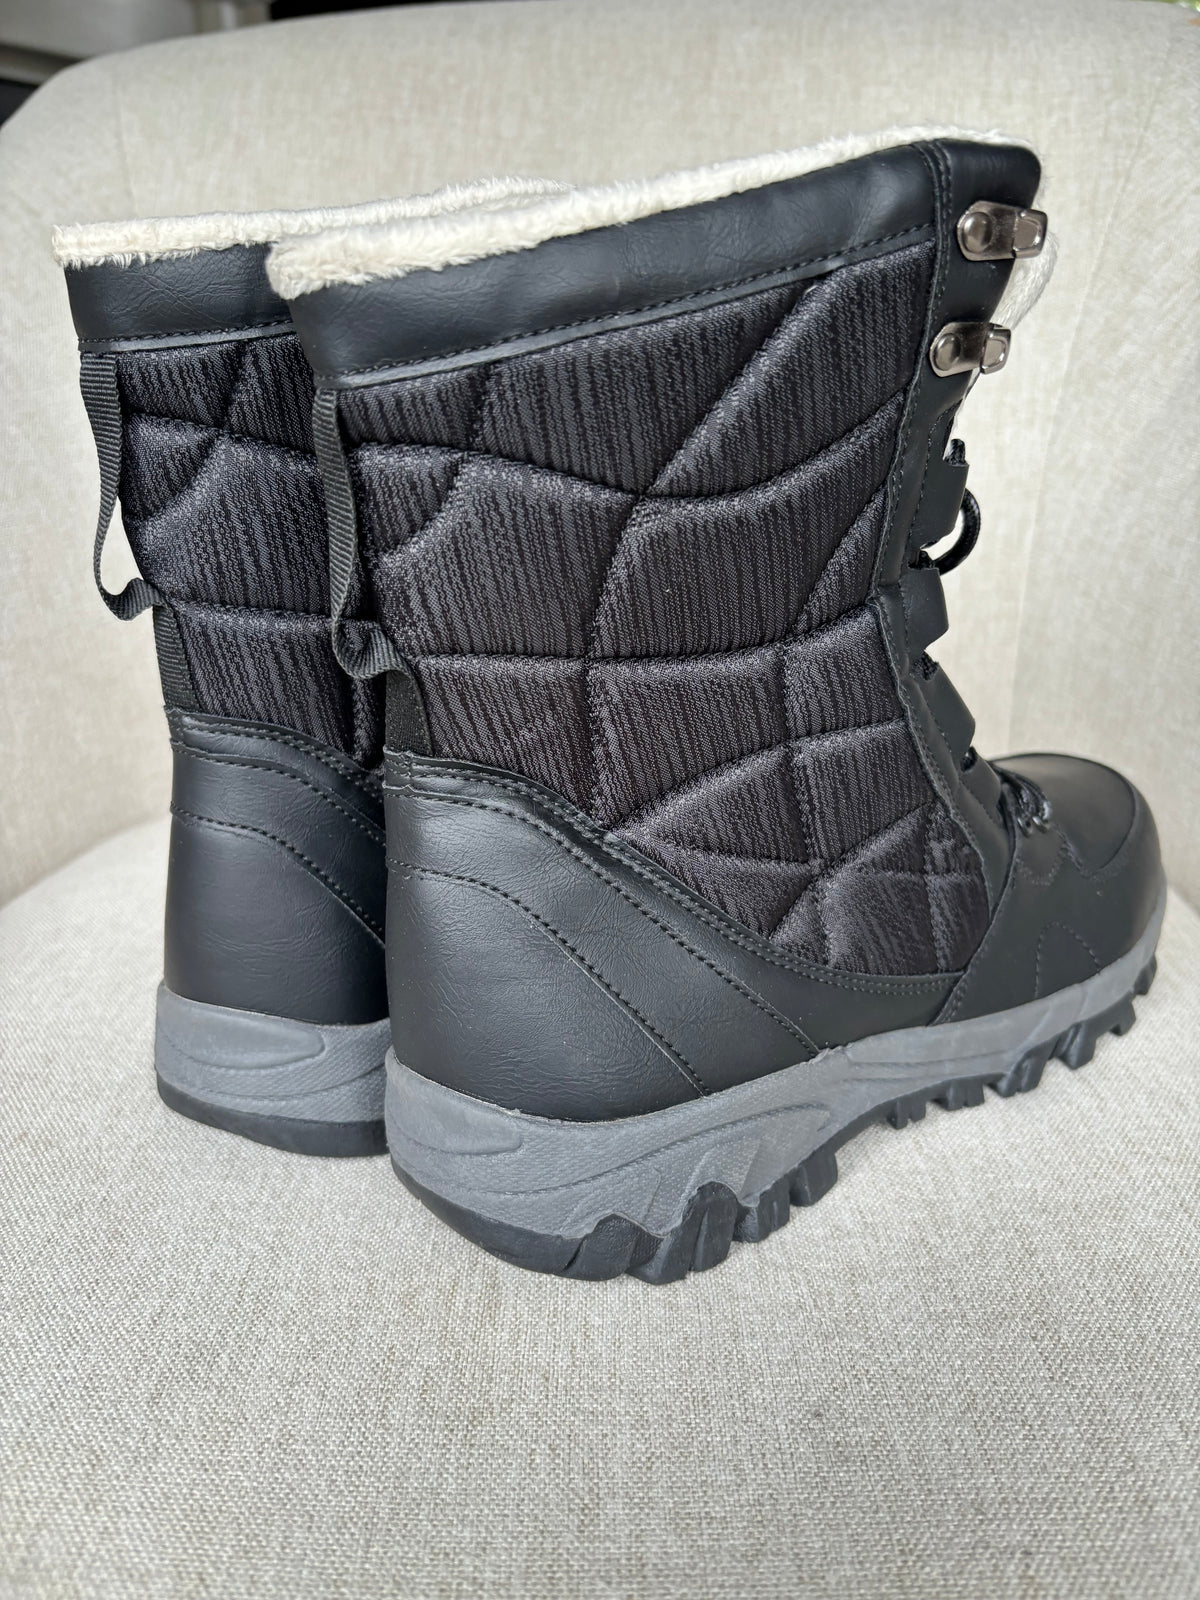 Black Winter Ankle Boots by Freemans Size 6.5 UK